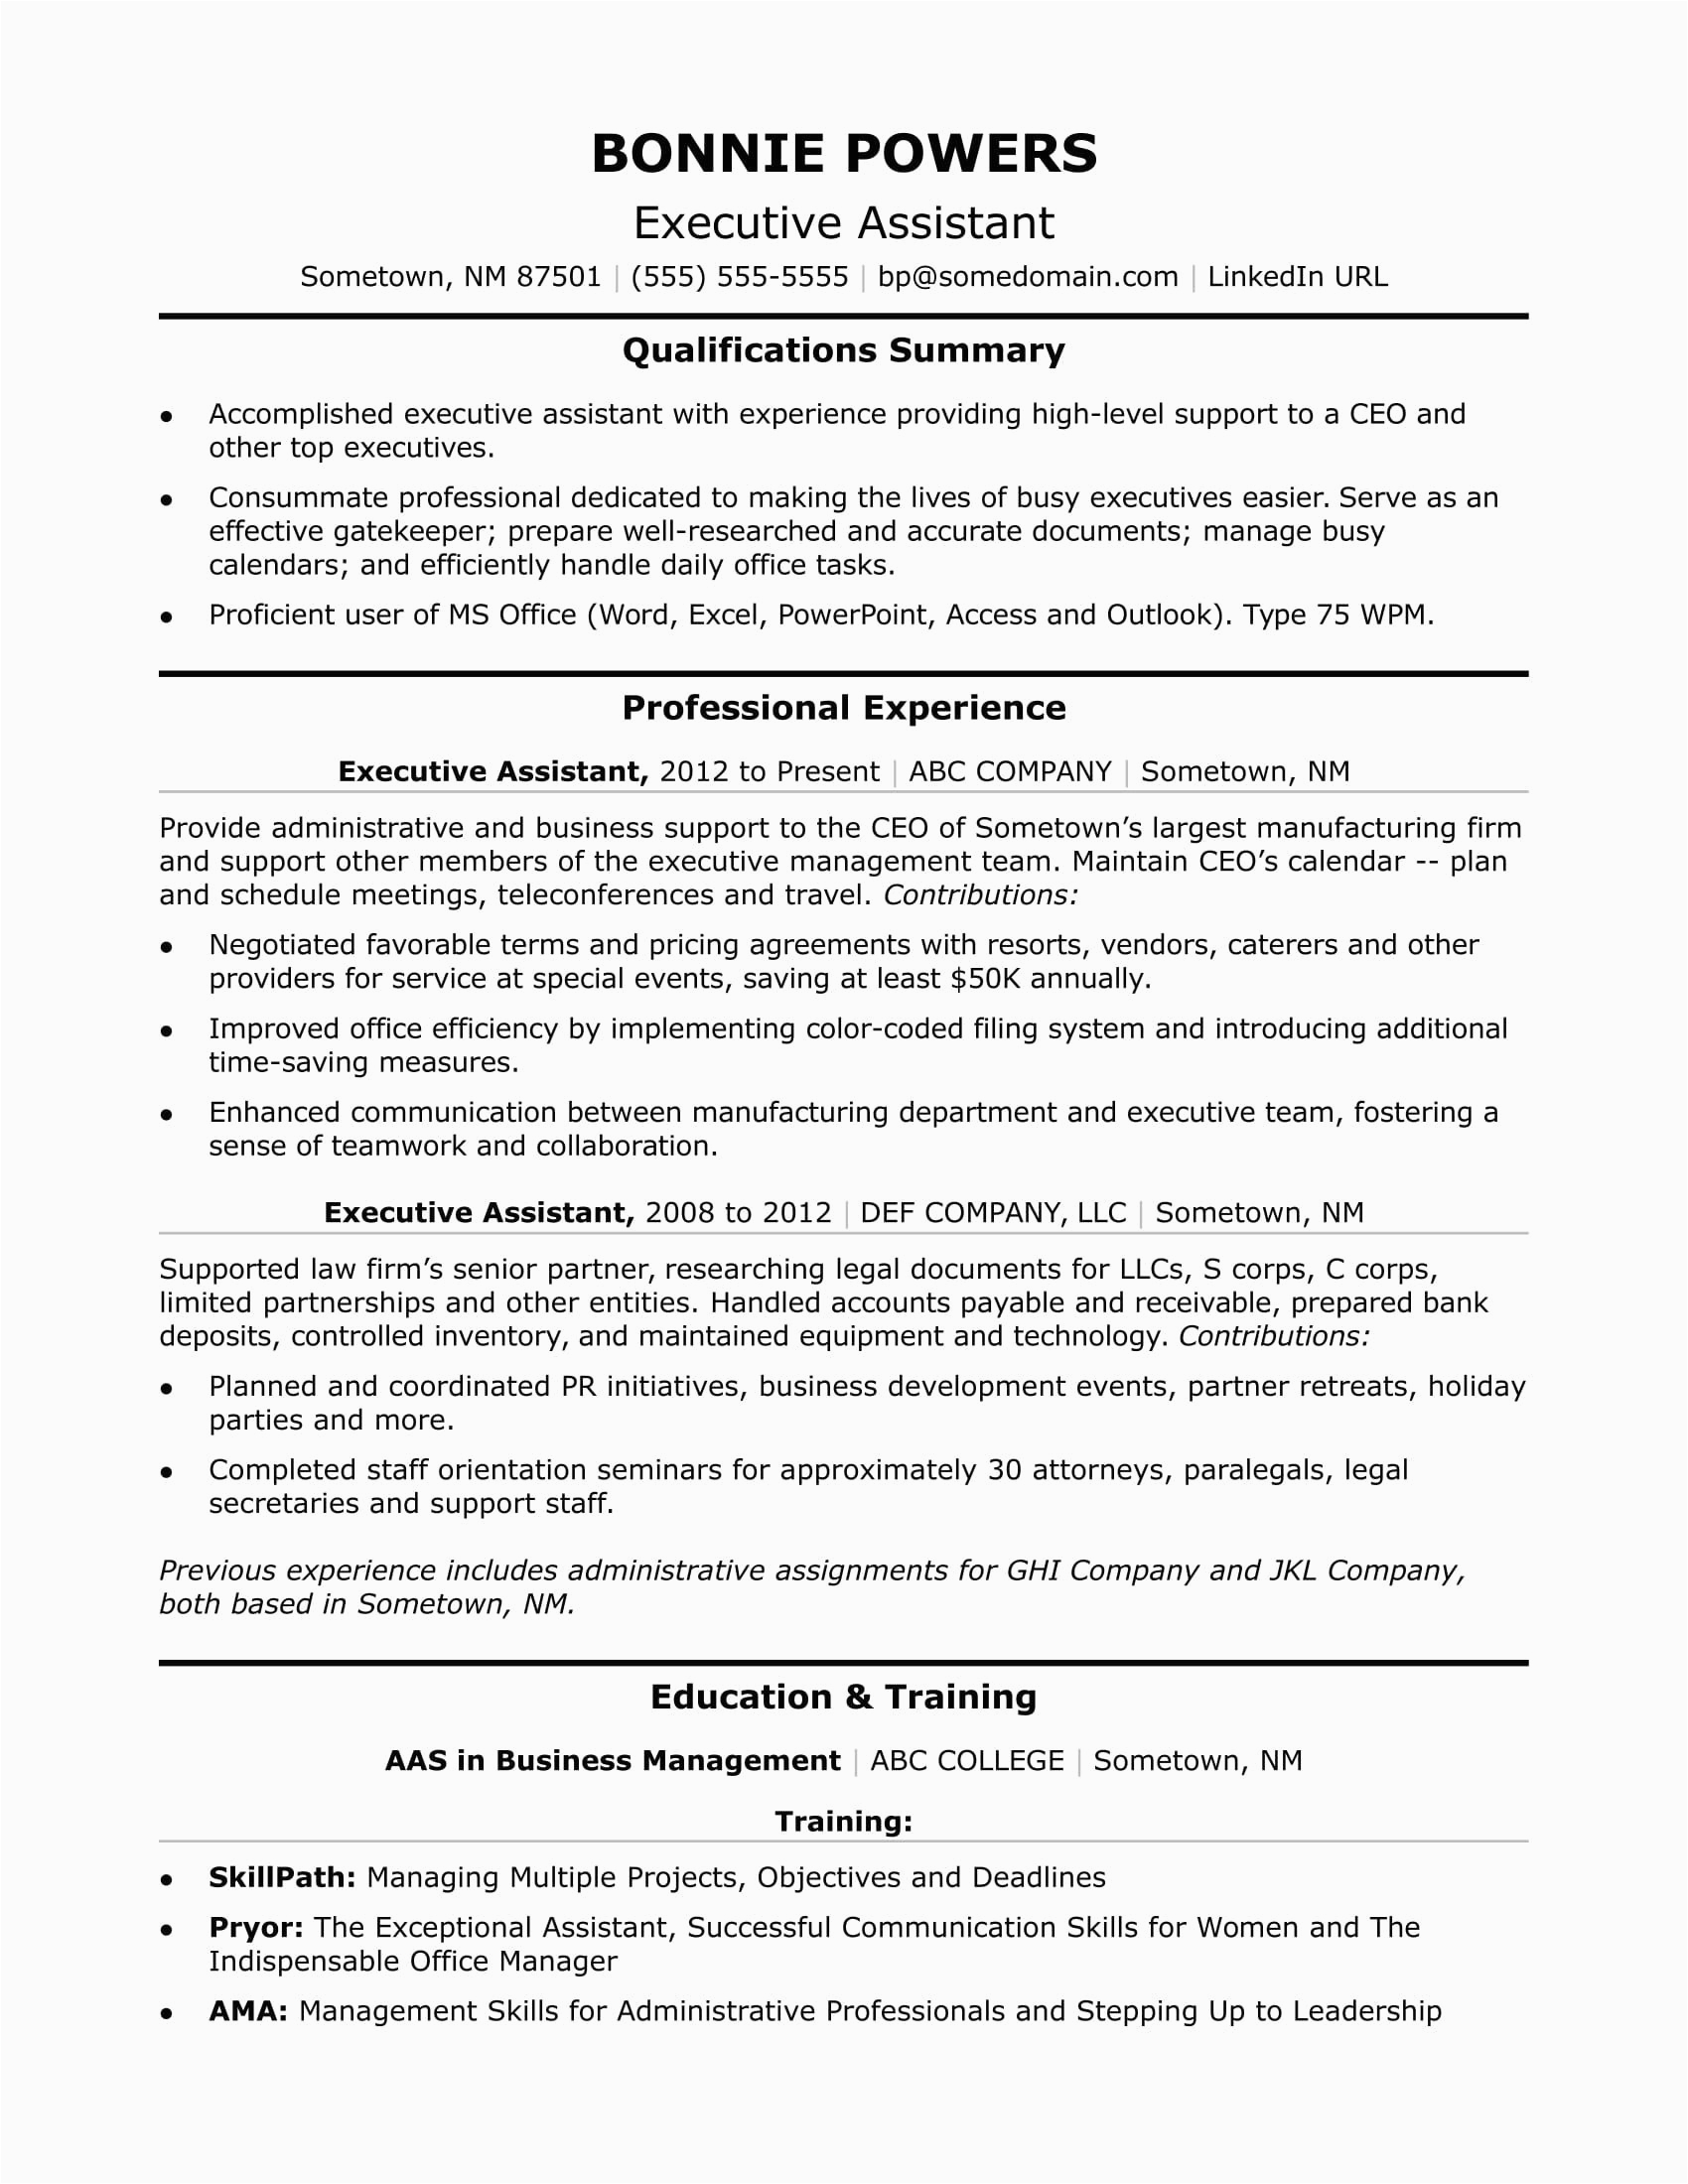 Executive assistant Summary Of Qualifications Sample Resume This Executive assistant Resume Sample Shows How You Can